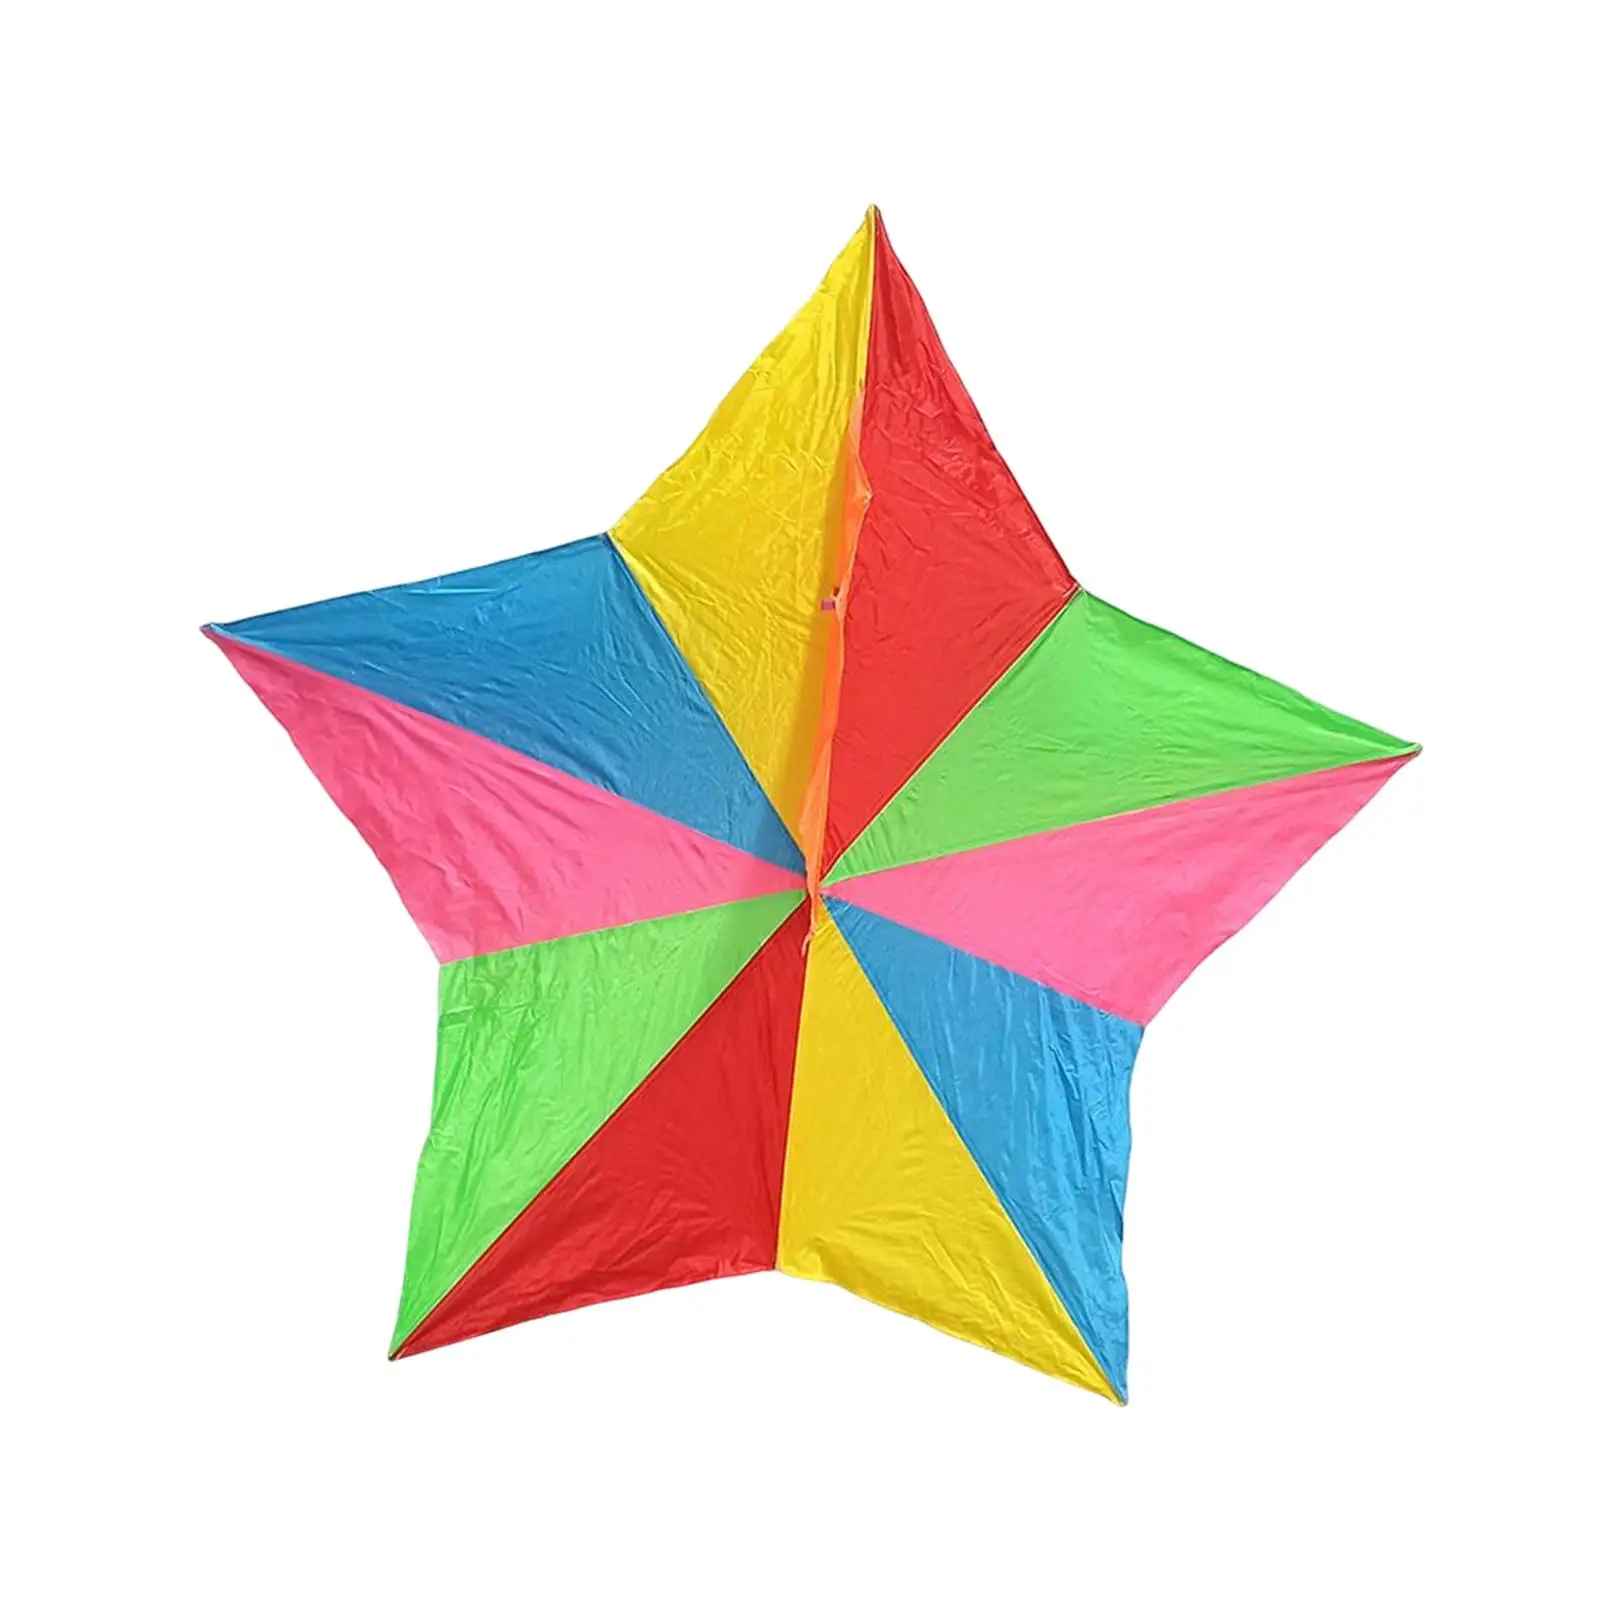 Huge Five Pointed Star Kite Adorable for Beach Outdoor Activities Girls Boys